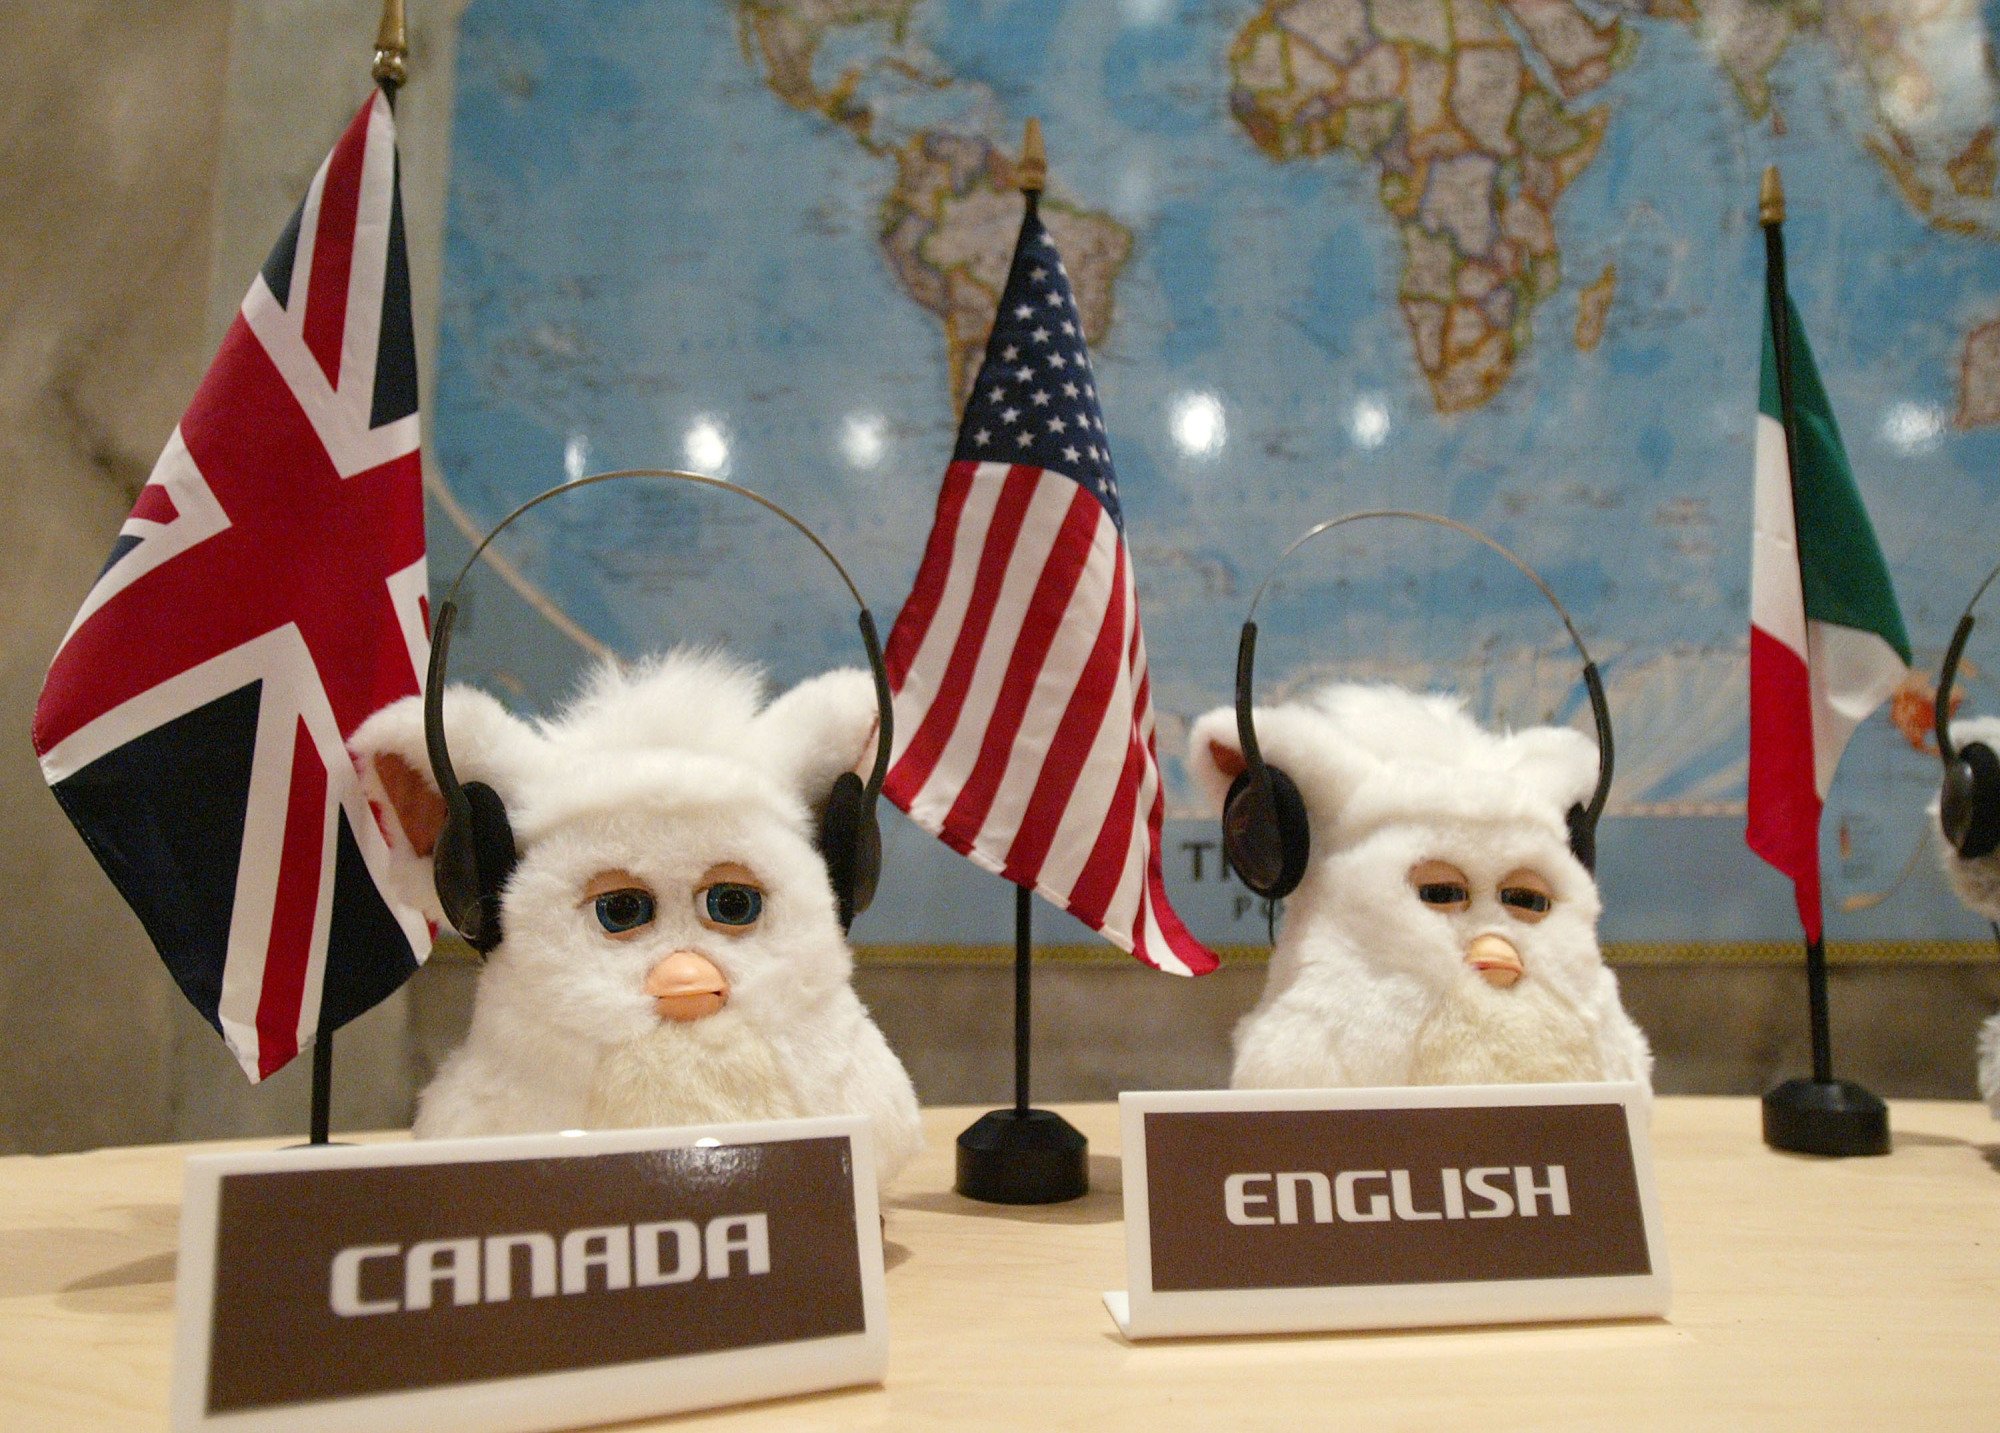 Two Furbies sitting at a desk, wearing headphones. Behind them are several flags from different countries, and in front of them are title plaques labelled "Canada" and "English."